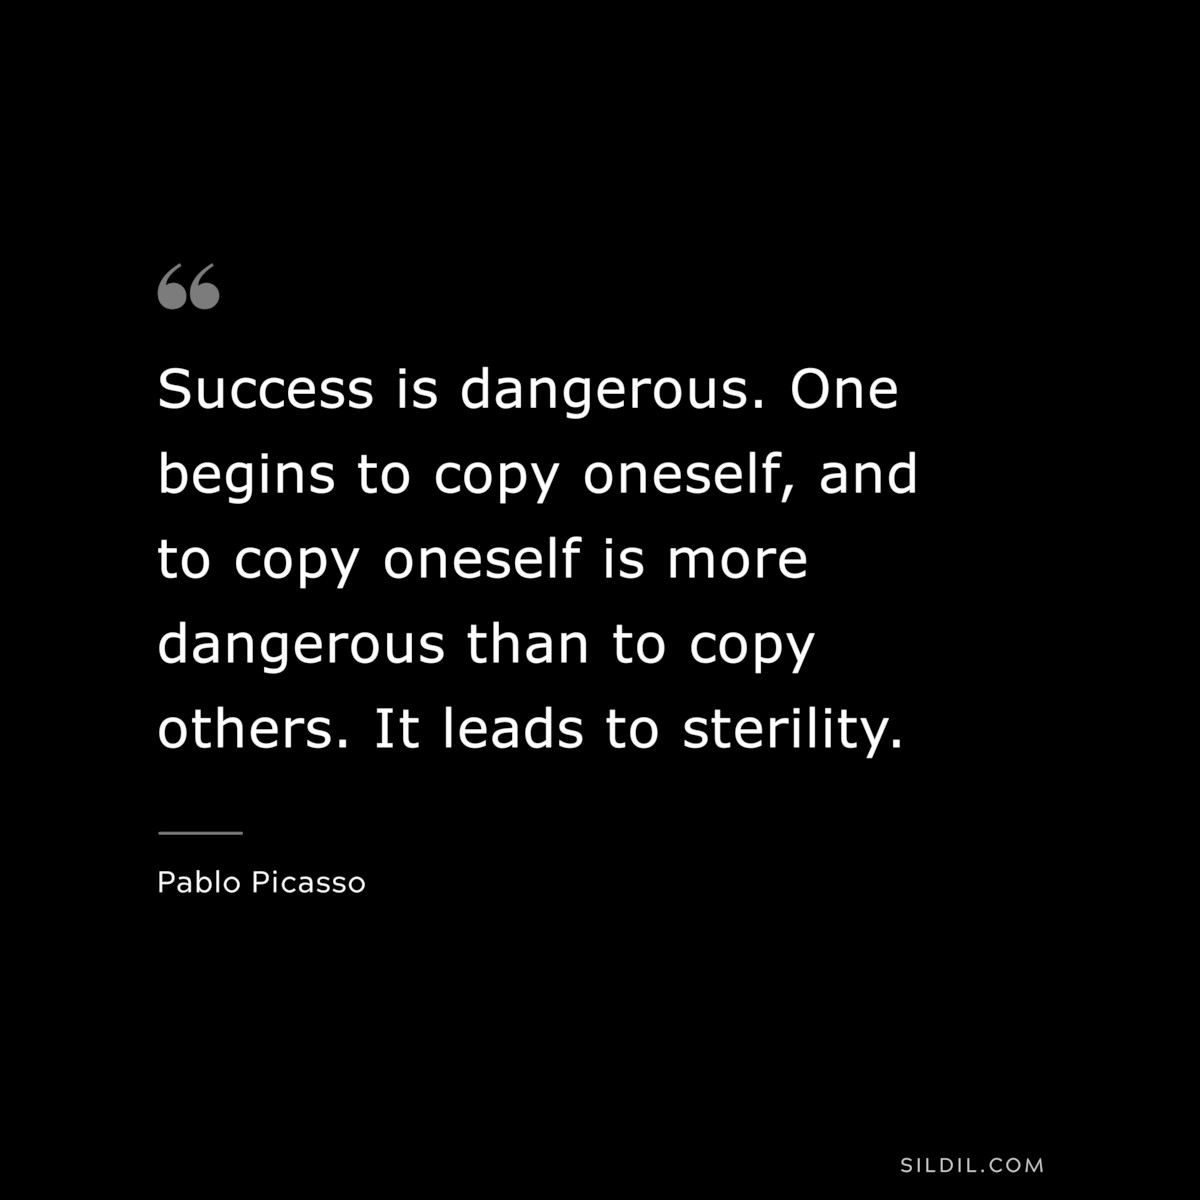 Success is dangerous. One begins to copy oneself, and to copy oneself is more dangerous than to copy others. It leads to sterility. ― Pablo Picasso